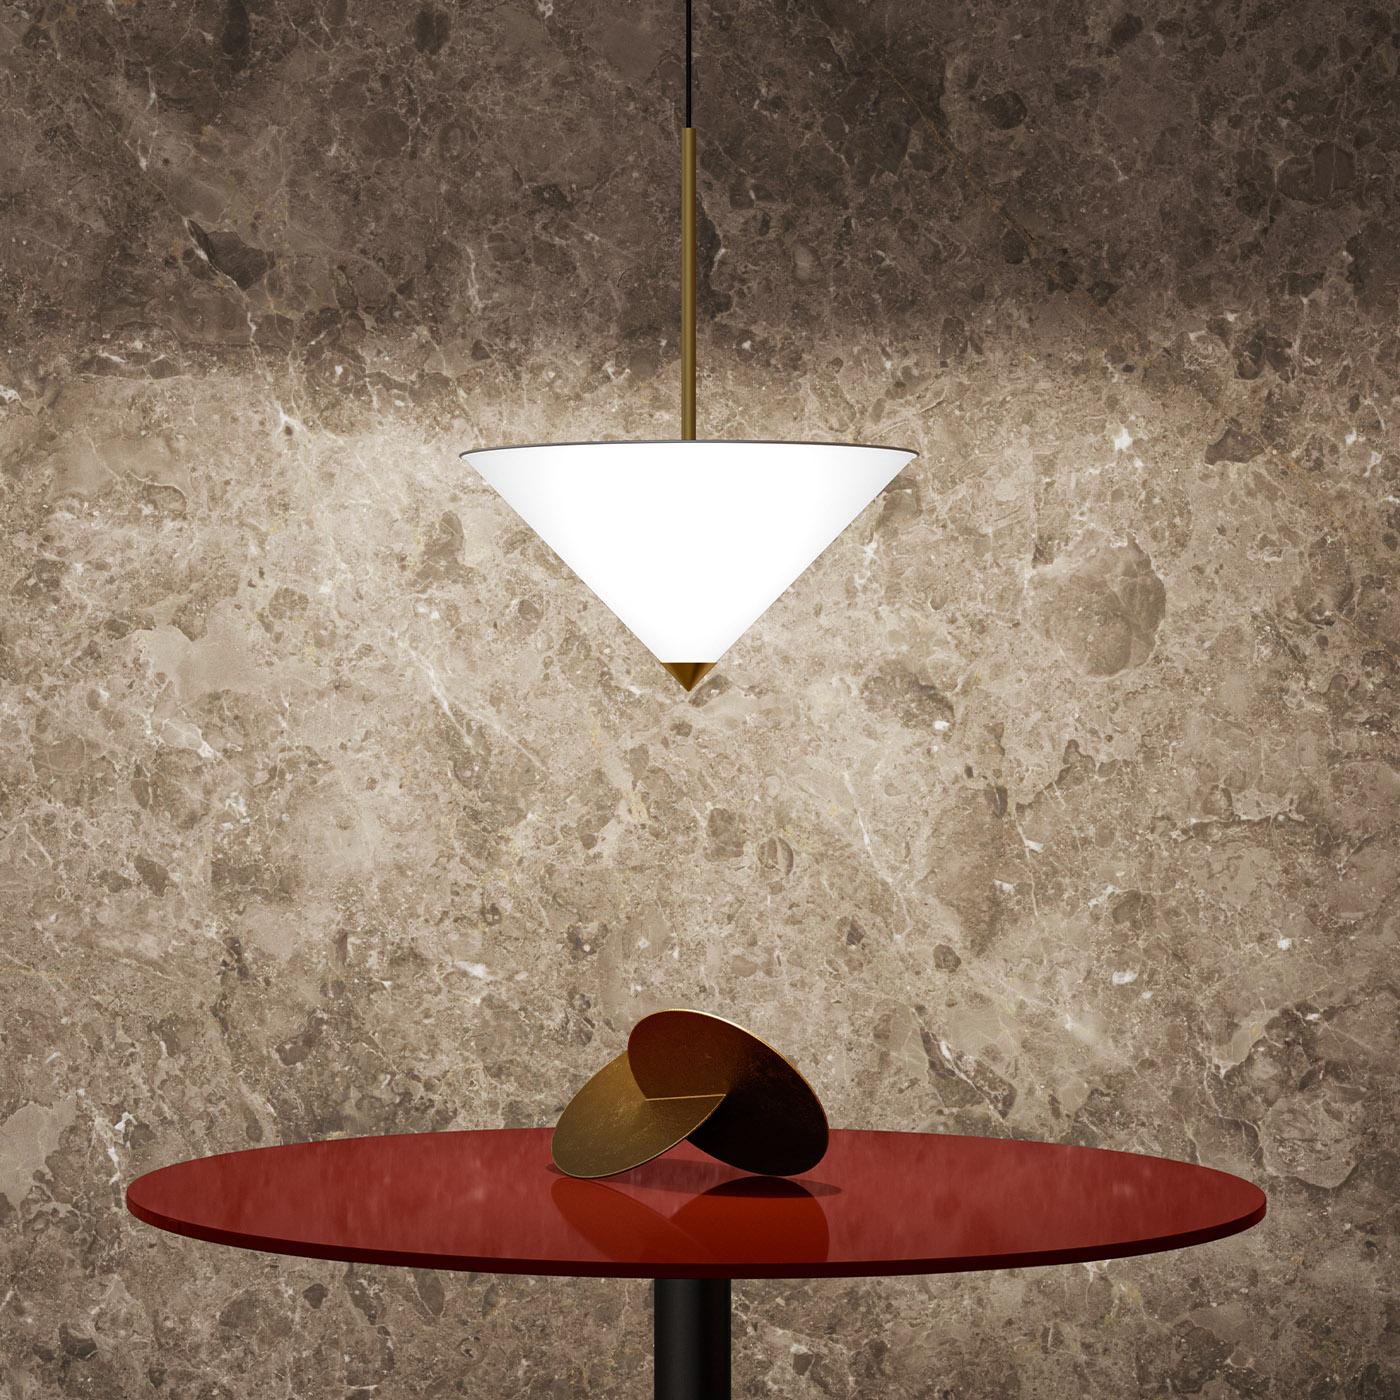 An extravagant design by Lorenza Bozzoli, this pendant lamp will make for an iconic addition to an eclectic contemporary interior. Suspended from a satin nickel rose, it features a conical shade made of satin white polycarbonate and enriched with